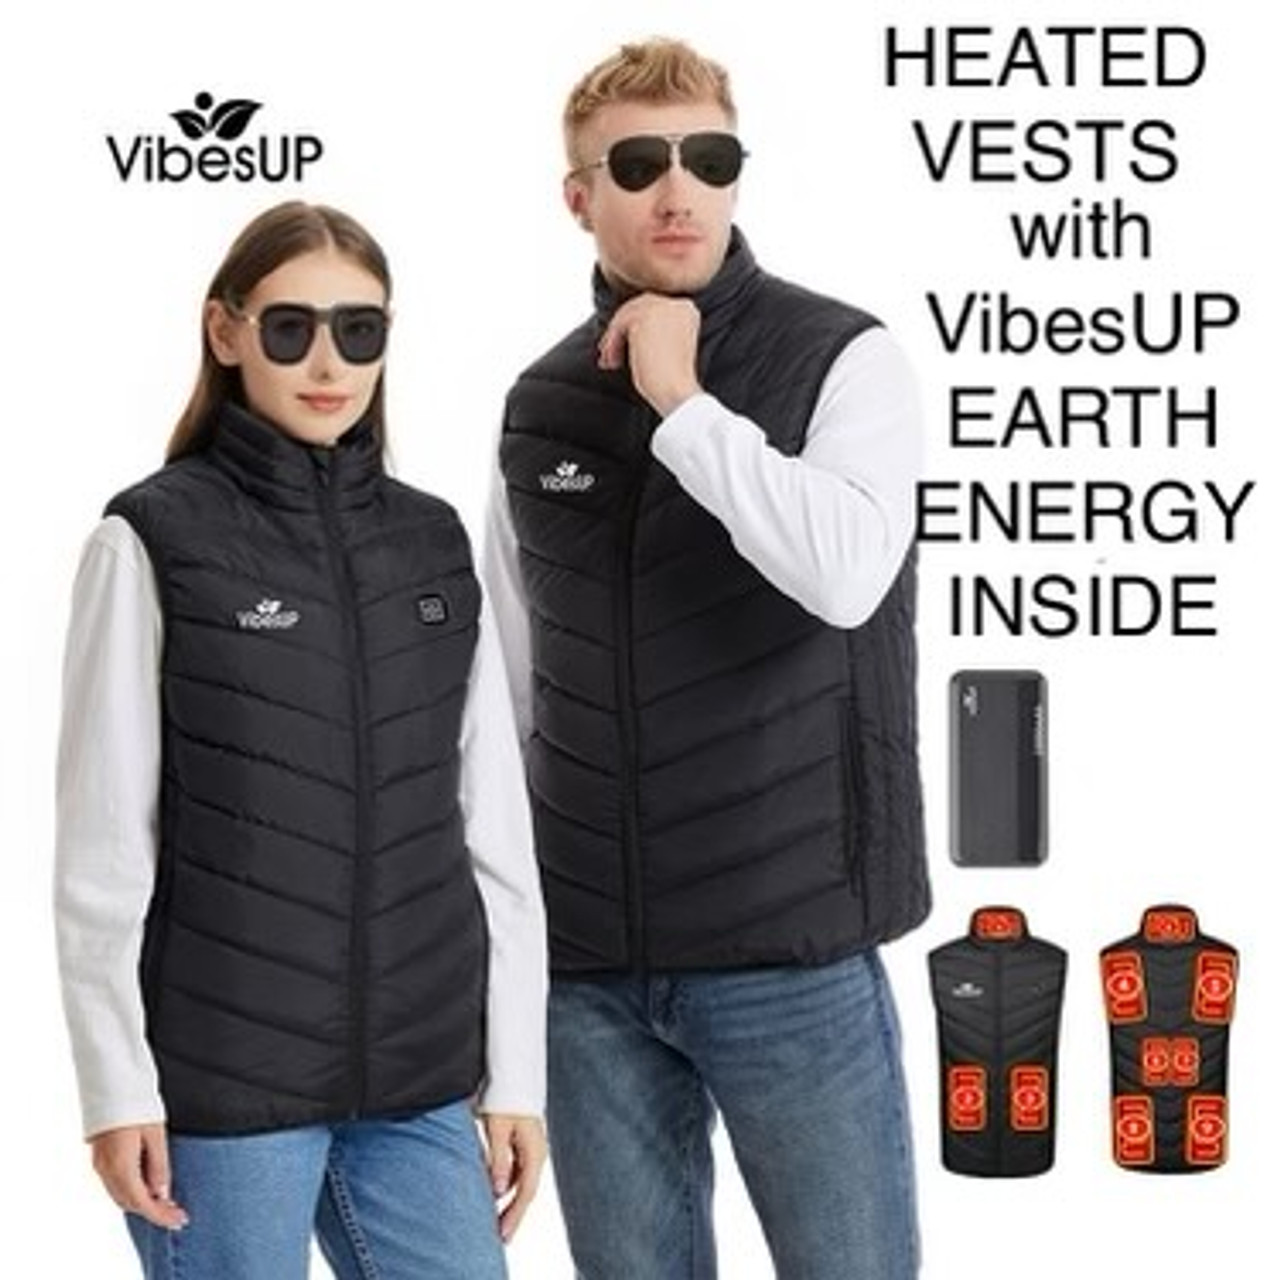 HEAT & CRYSTAL VIBES THERAPY VEST JACKET